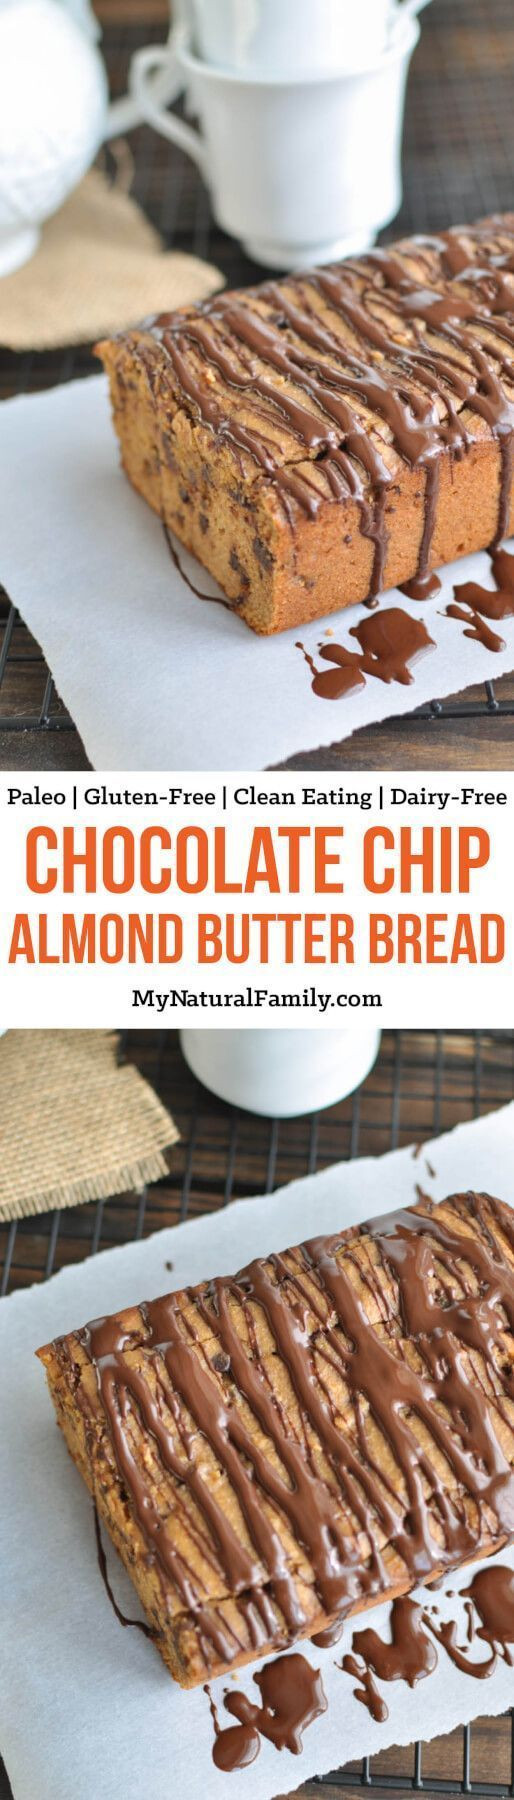 Paleo Diet Butter
 Paleo Almond Butter Bread Recipe with Chocolate Chips